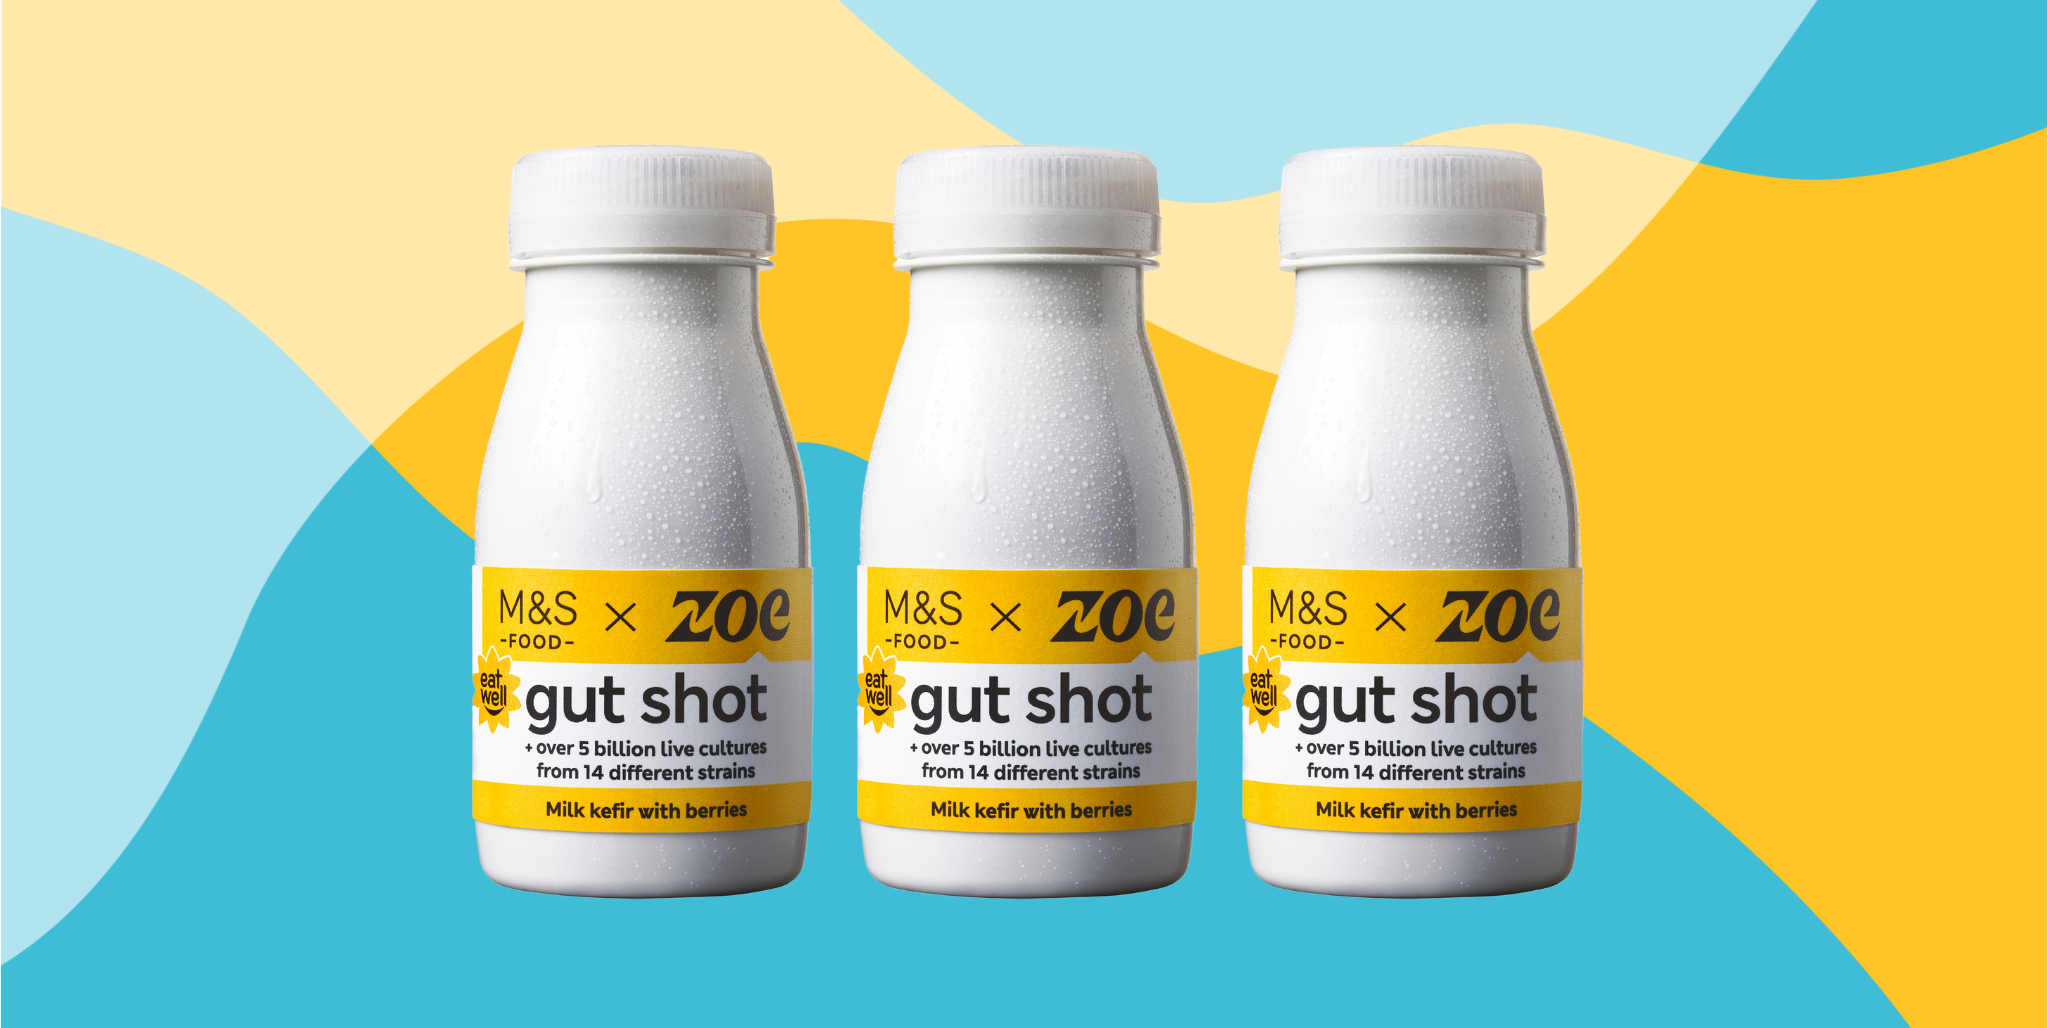 M&S Food teams up with Zoe to launch a brand new gut shot